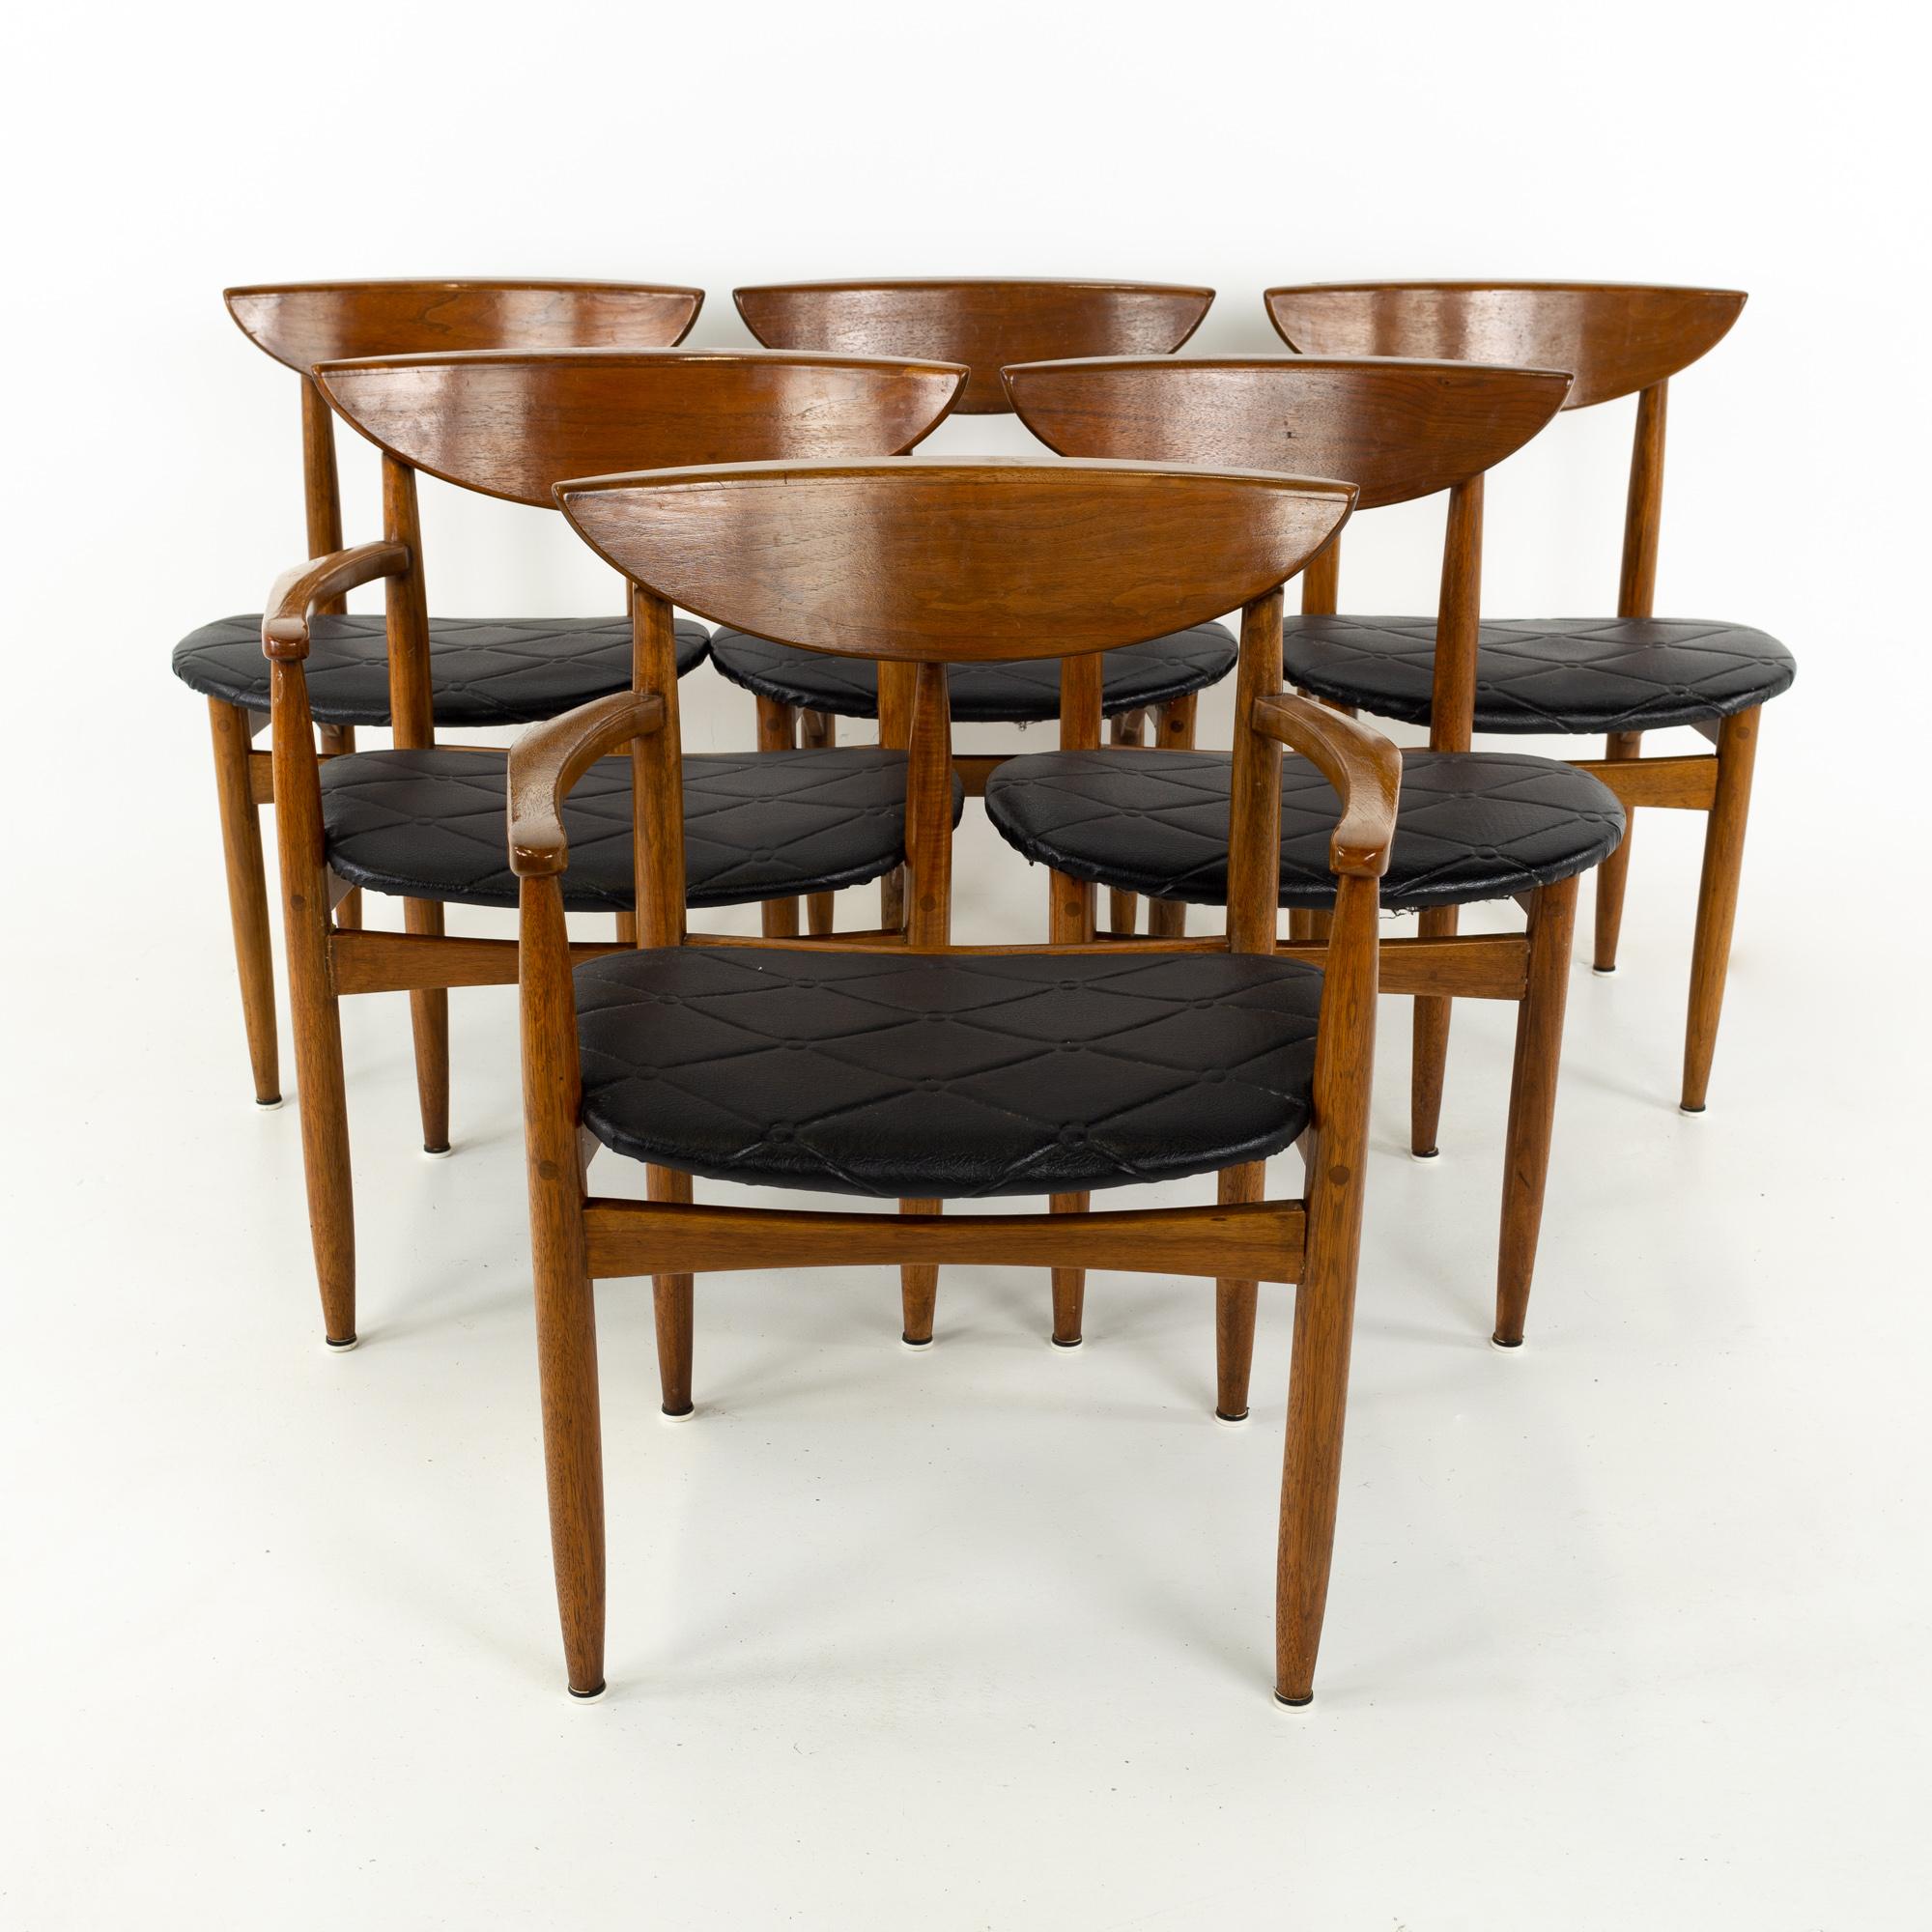 Lane perception midcentury walnut cats eye dining chairs, set of 6
These chairs are 25 wide x 20.5 deep x 30.5 inches high, with a seat height of 17.5 and arm height of 24.75 inches

All pieces of furniture can be had in what we call restored